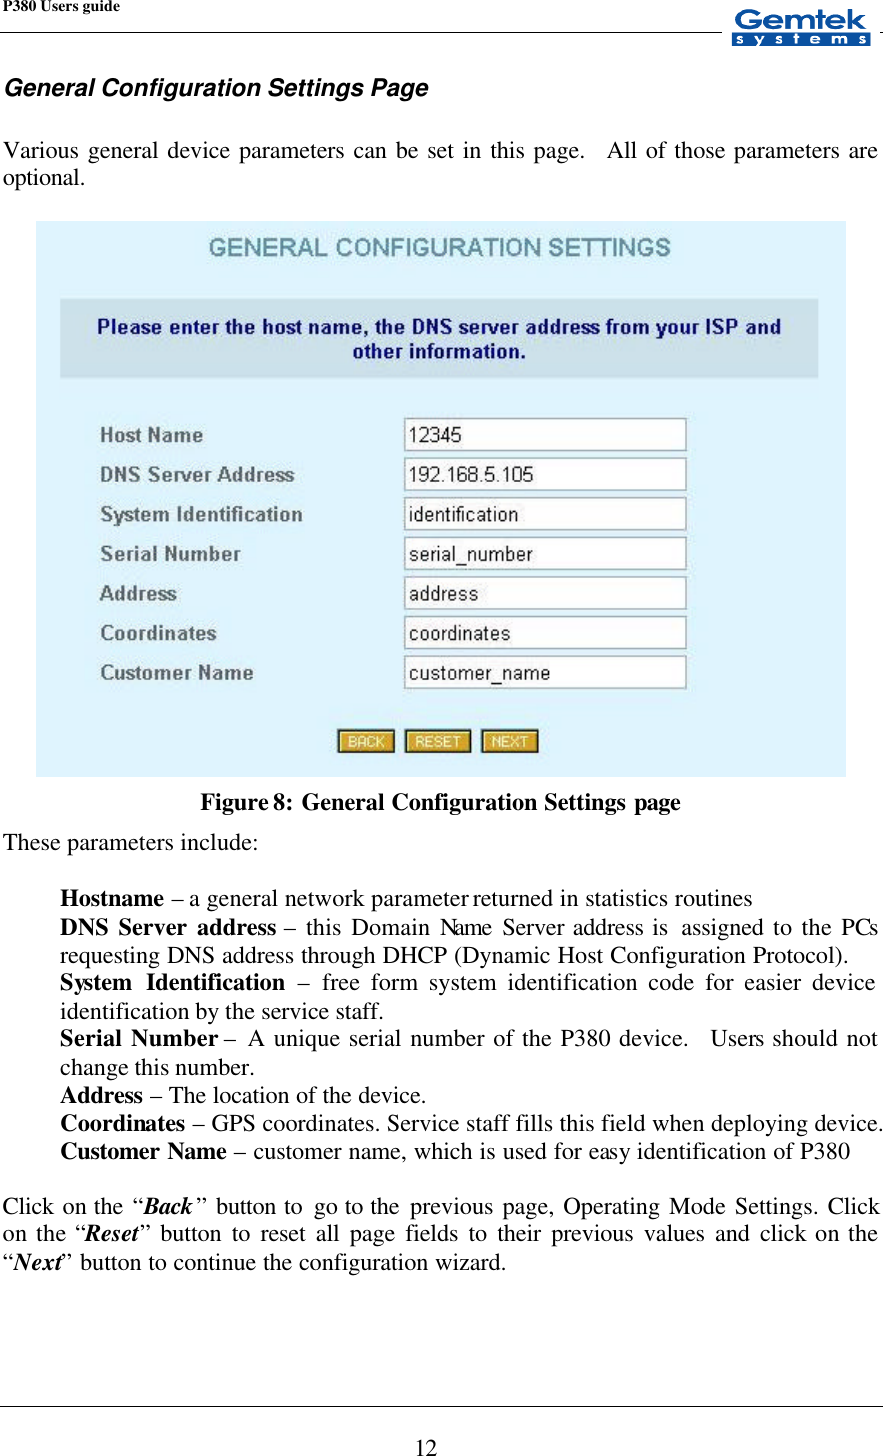 P380 Users guide            12 General Configuration Settings Page  Various general device parameters can be set in this page.  All of those parameters are optional.   Figure 8: General Configuration Settings page These parameters include:  Hostname – a general network parameter returned in statistics routines DNS Server address – this Domain Name Server address is  assigned to the PCs requesting DNS address through DHCP (Dynamic Host Configuration Protocol). System Identification – free form system identification code for easier device identification by the service staff. Serial Number – A unique serial number of the P380 device.  Users should not change this number. Address – The location of the device. Coordinates – GPS coordinates. Service staff fills this field when deploying device. Customer Name – customer name, which is used for easy identification of P380  Click  on the “Back” button to  go to the  previous page, Operating Mode Settings. Click on the “Reset” button to reset all page fields to their previous values and click on the “Next” button to continue the configuration wizard.  